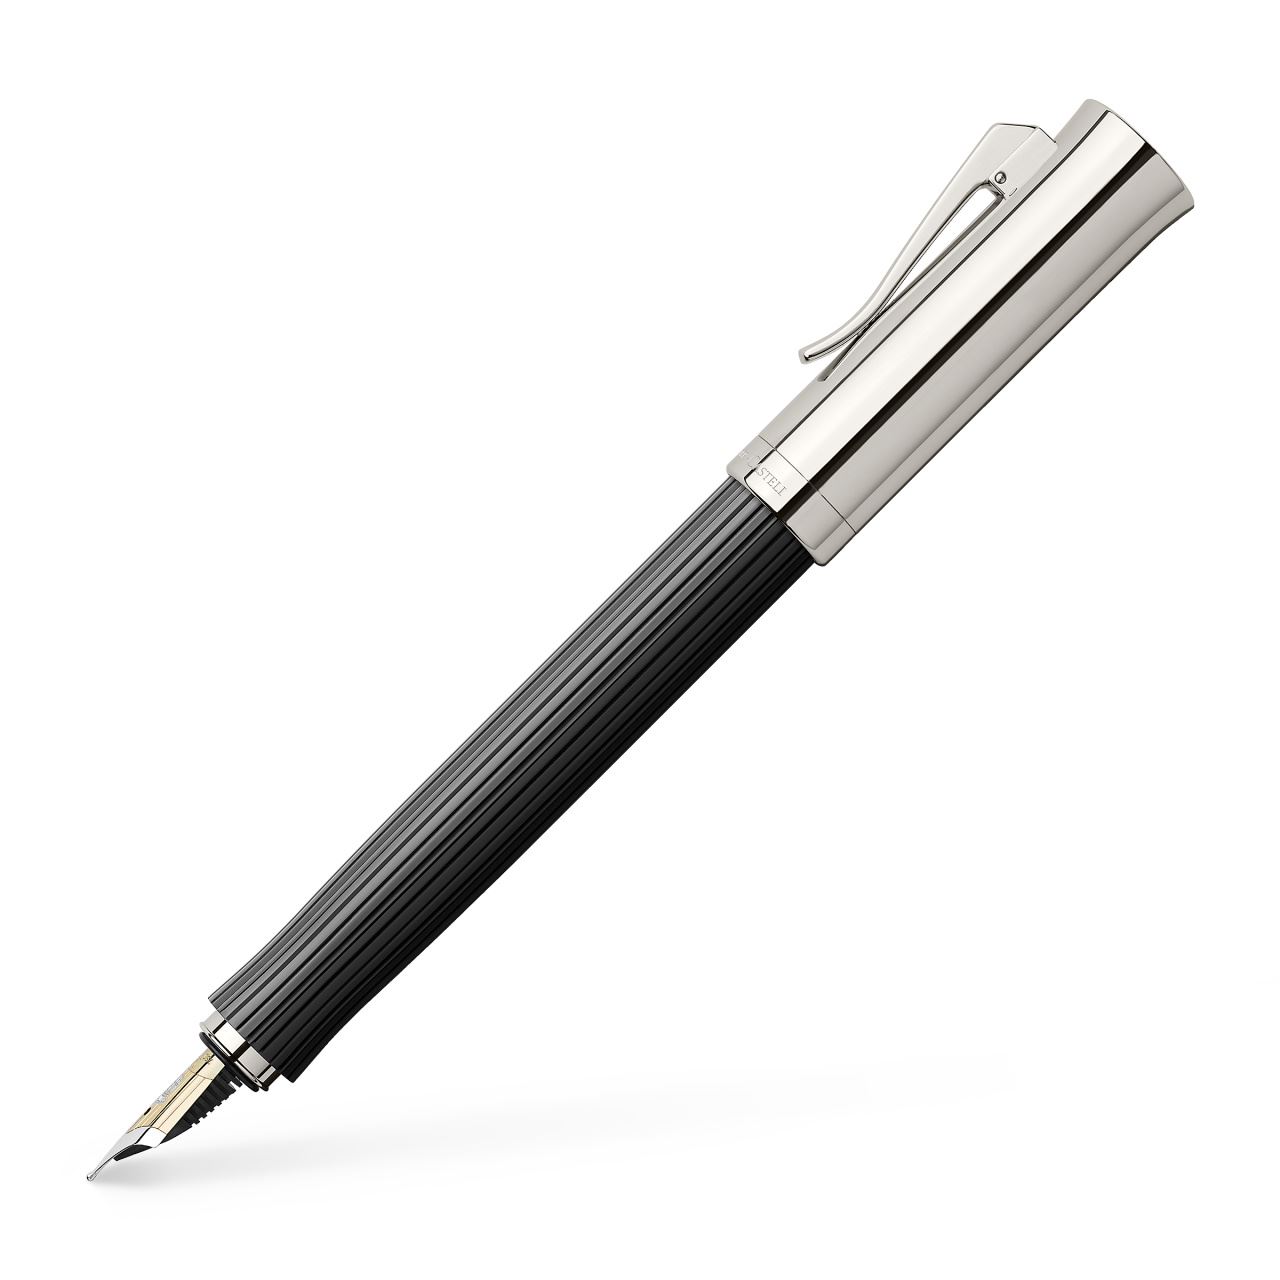 Graf-von-Faber-Castell - Fountain pen Intuition Platino fluted, black, Broad